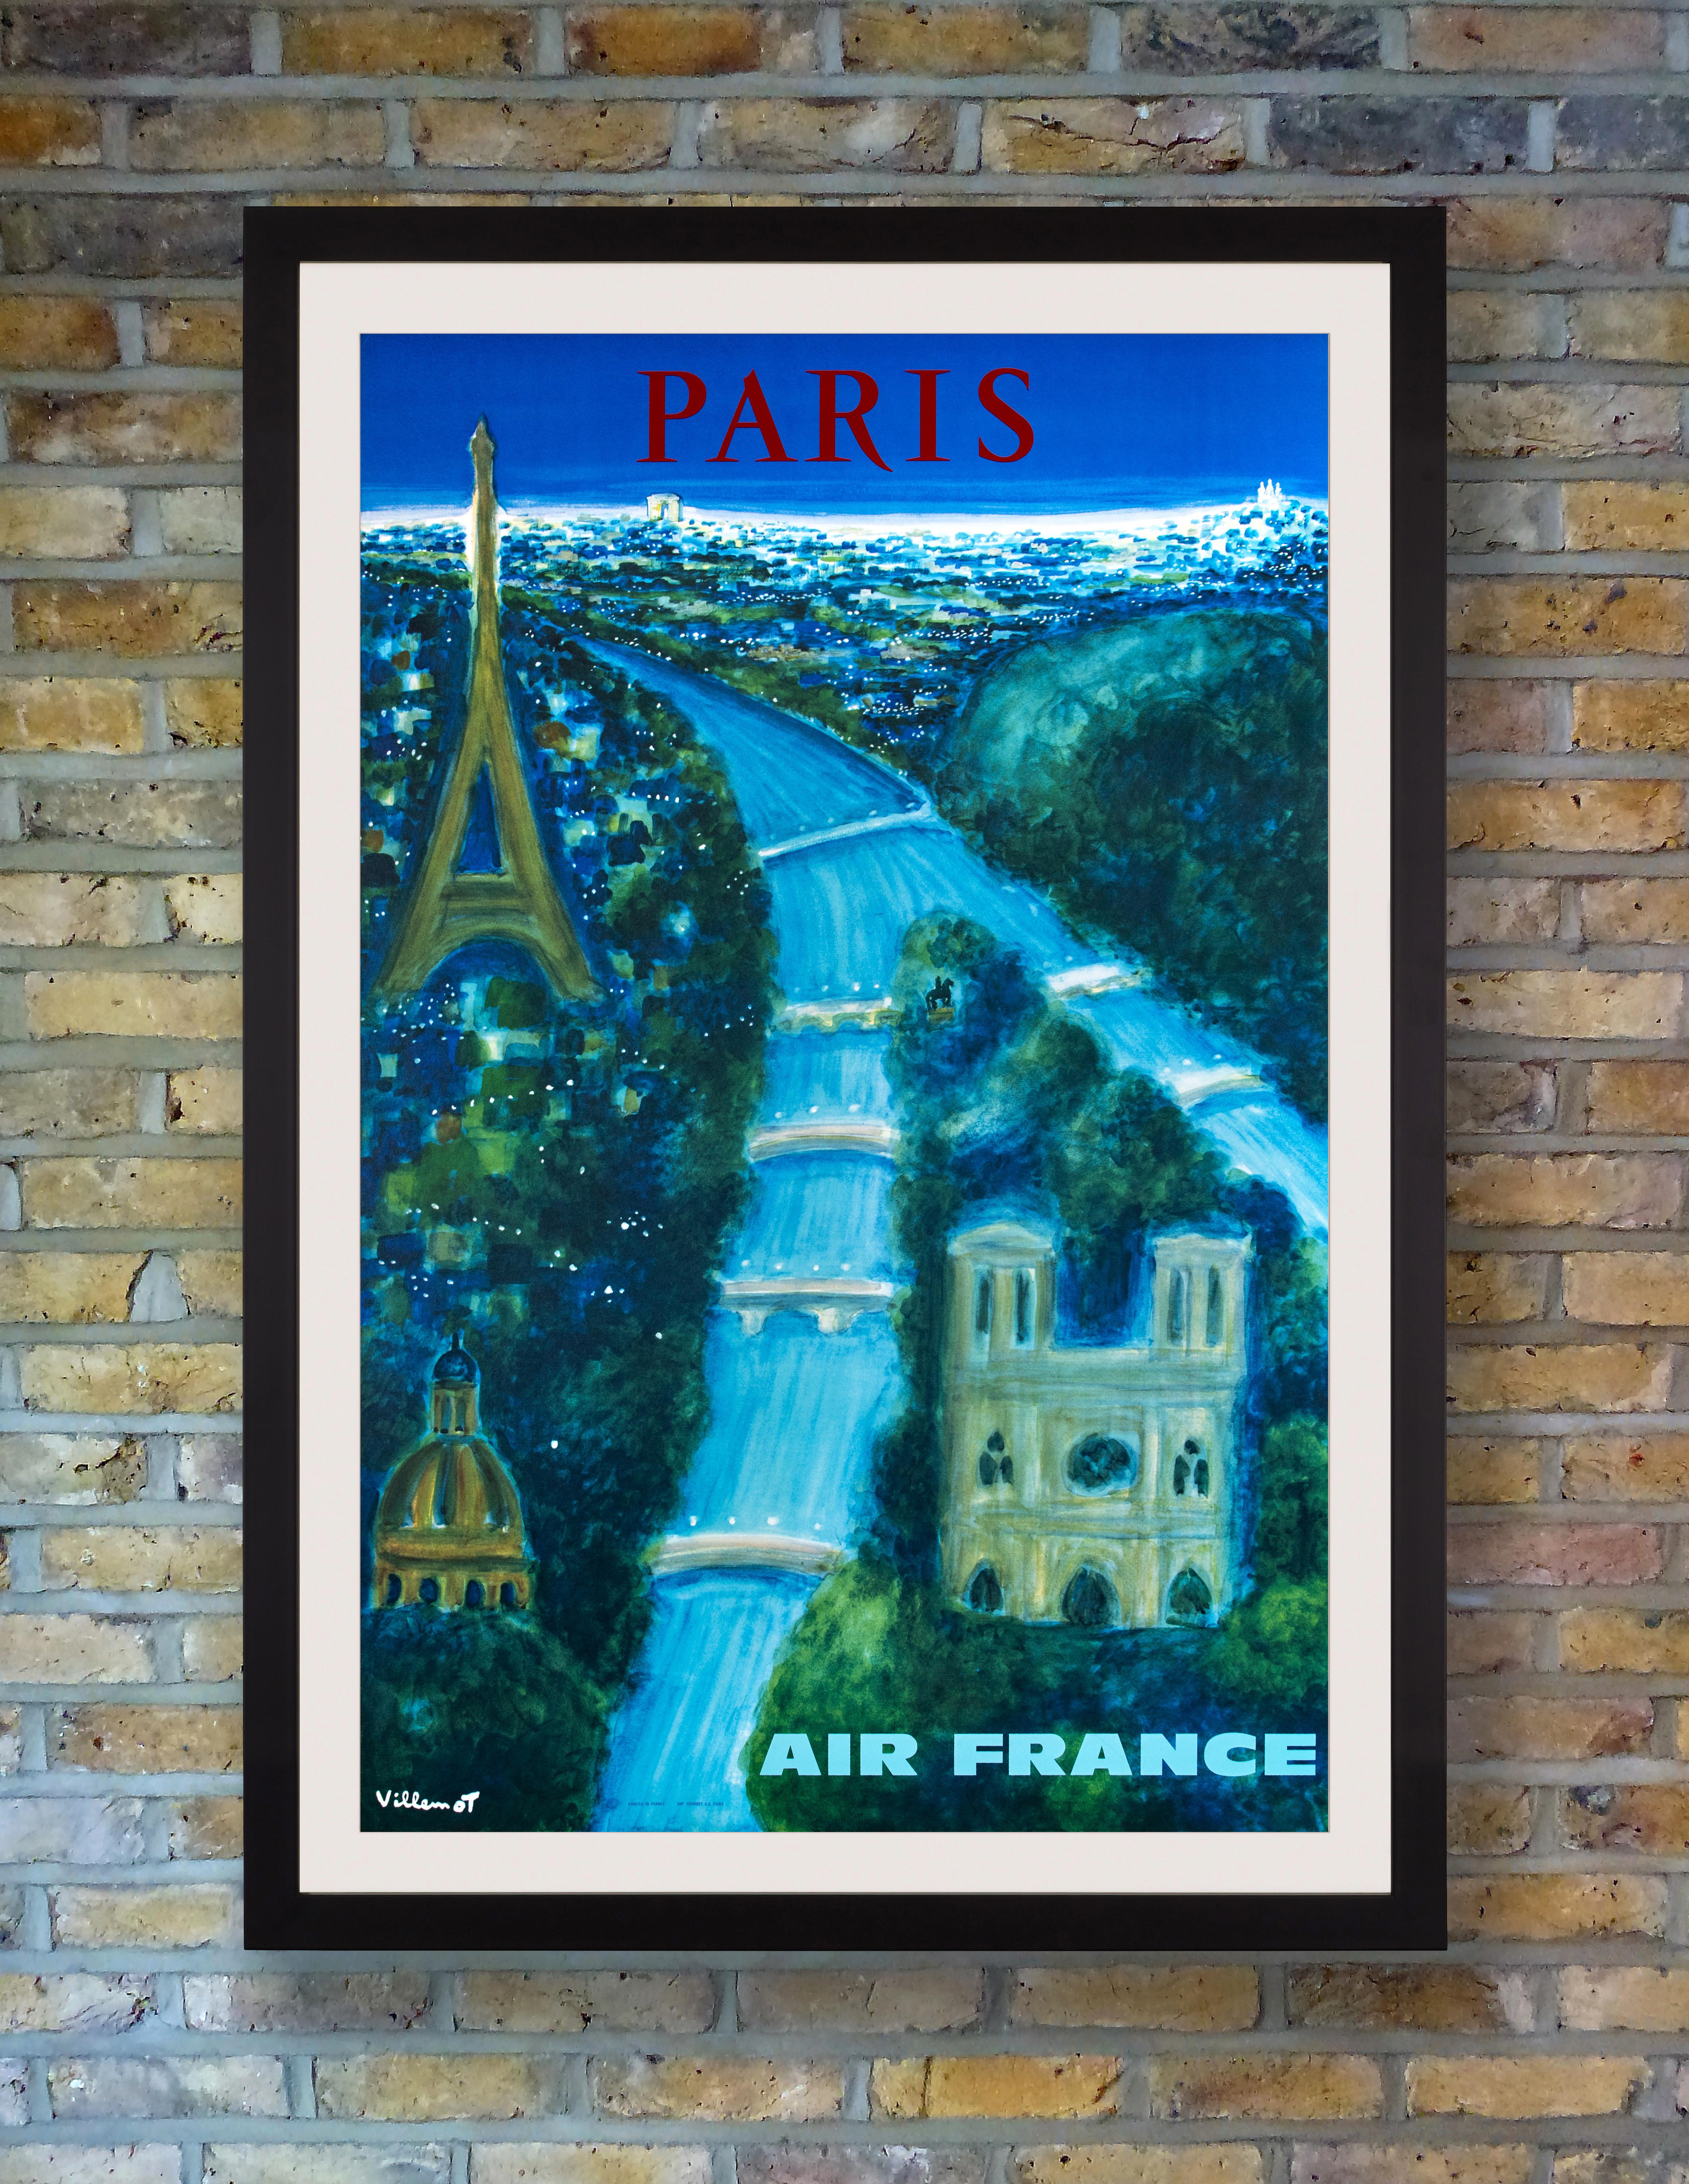 Air France commissioned French artist Bernard Villemot to design this dazzling poster to promote tourism to Paris in 1967. Primarily printed in blue and green, the painterly design follows the River Seine from above as one might view the city when